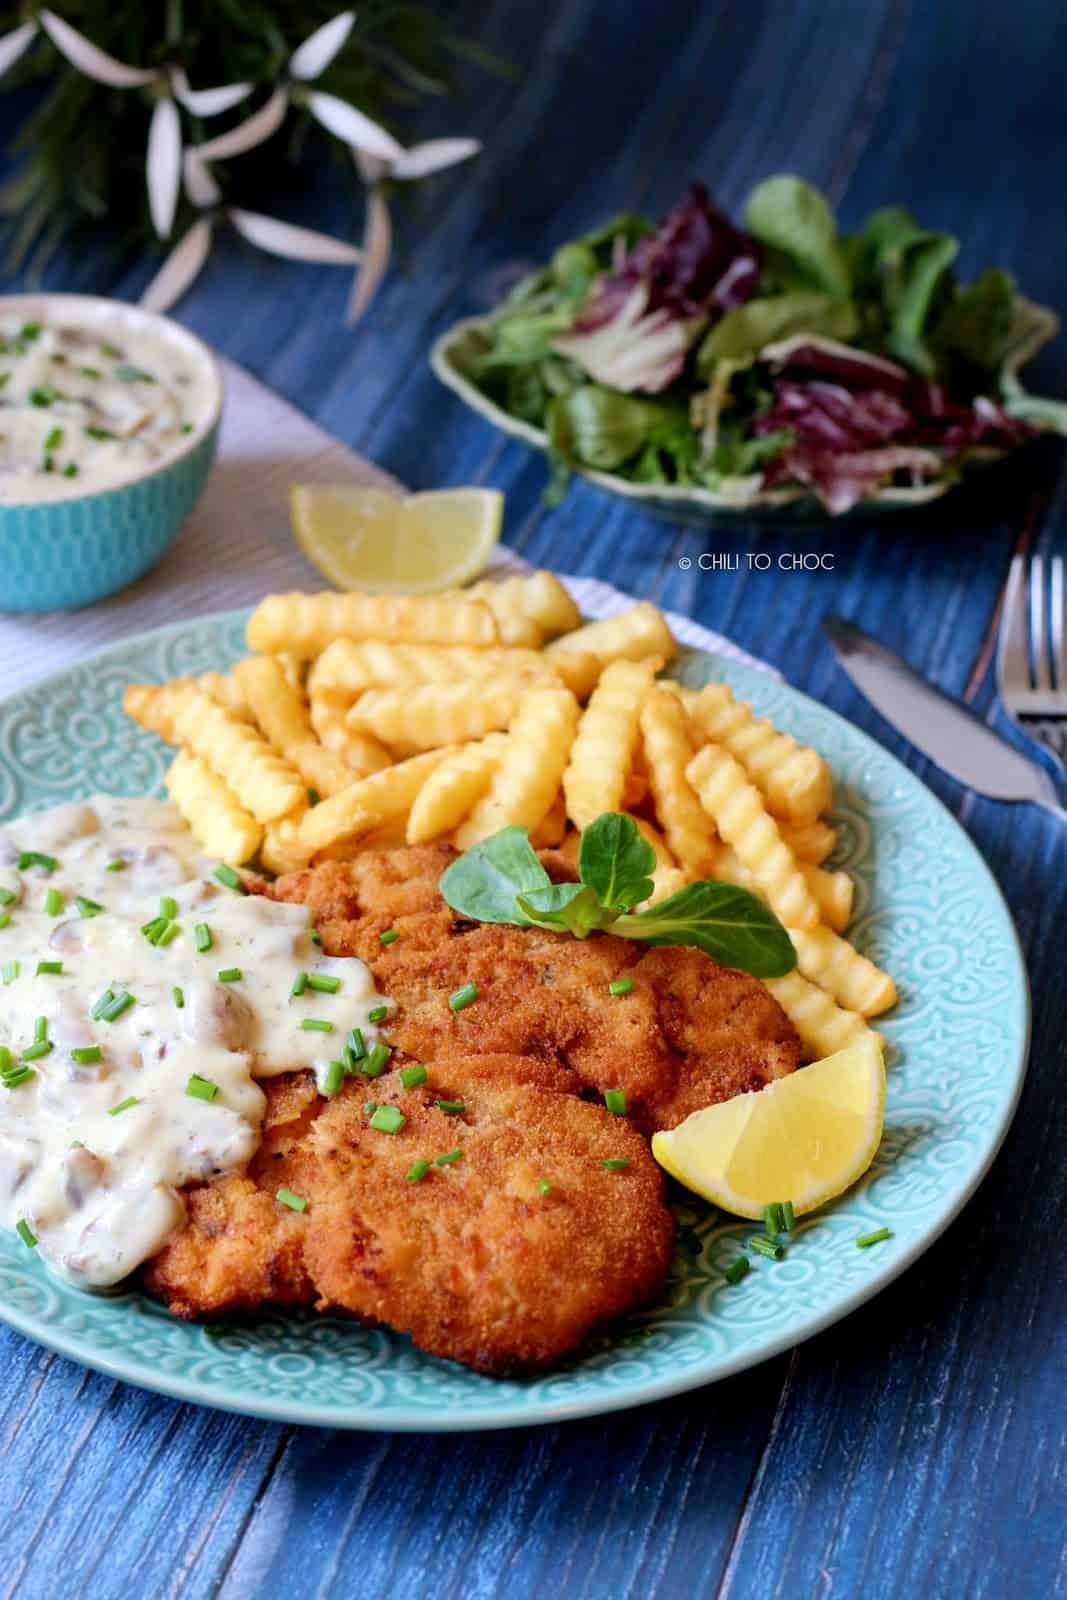 Schnitzel served with mushroom sauce, fries, lemon wedge and a salad